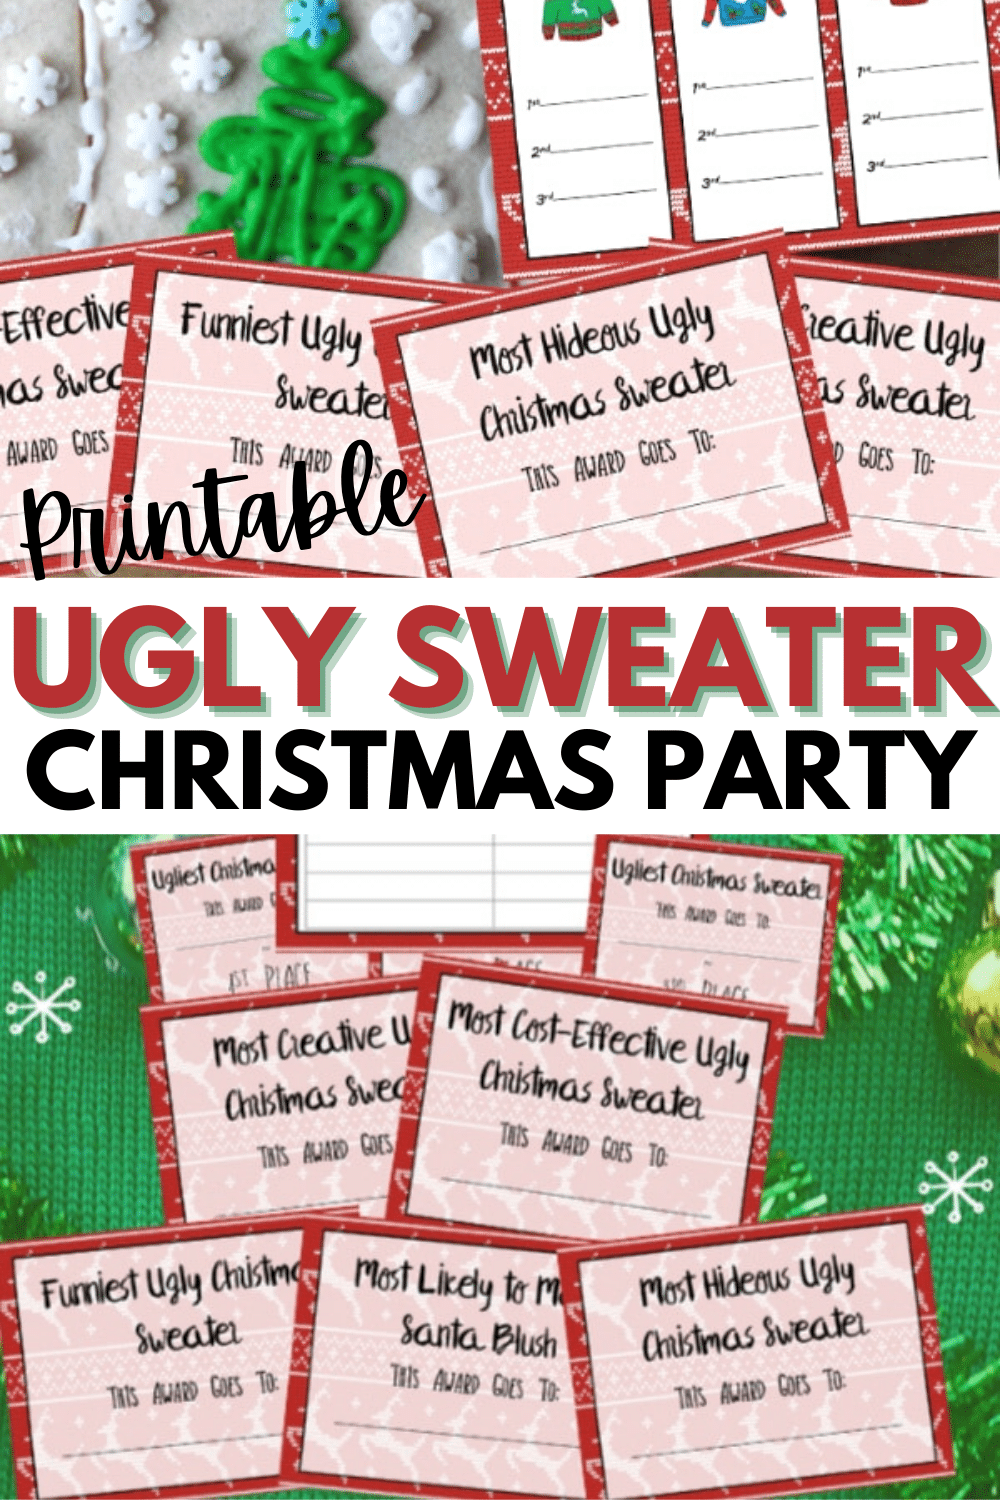 These Ugly Sweater Party Printables will make your Ugly Christmas Sweater Party a blast and easy to throw. Printable invitations, voting cards and awards. #uglysweatercontest #christmas #printables via @wondermomwannab